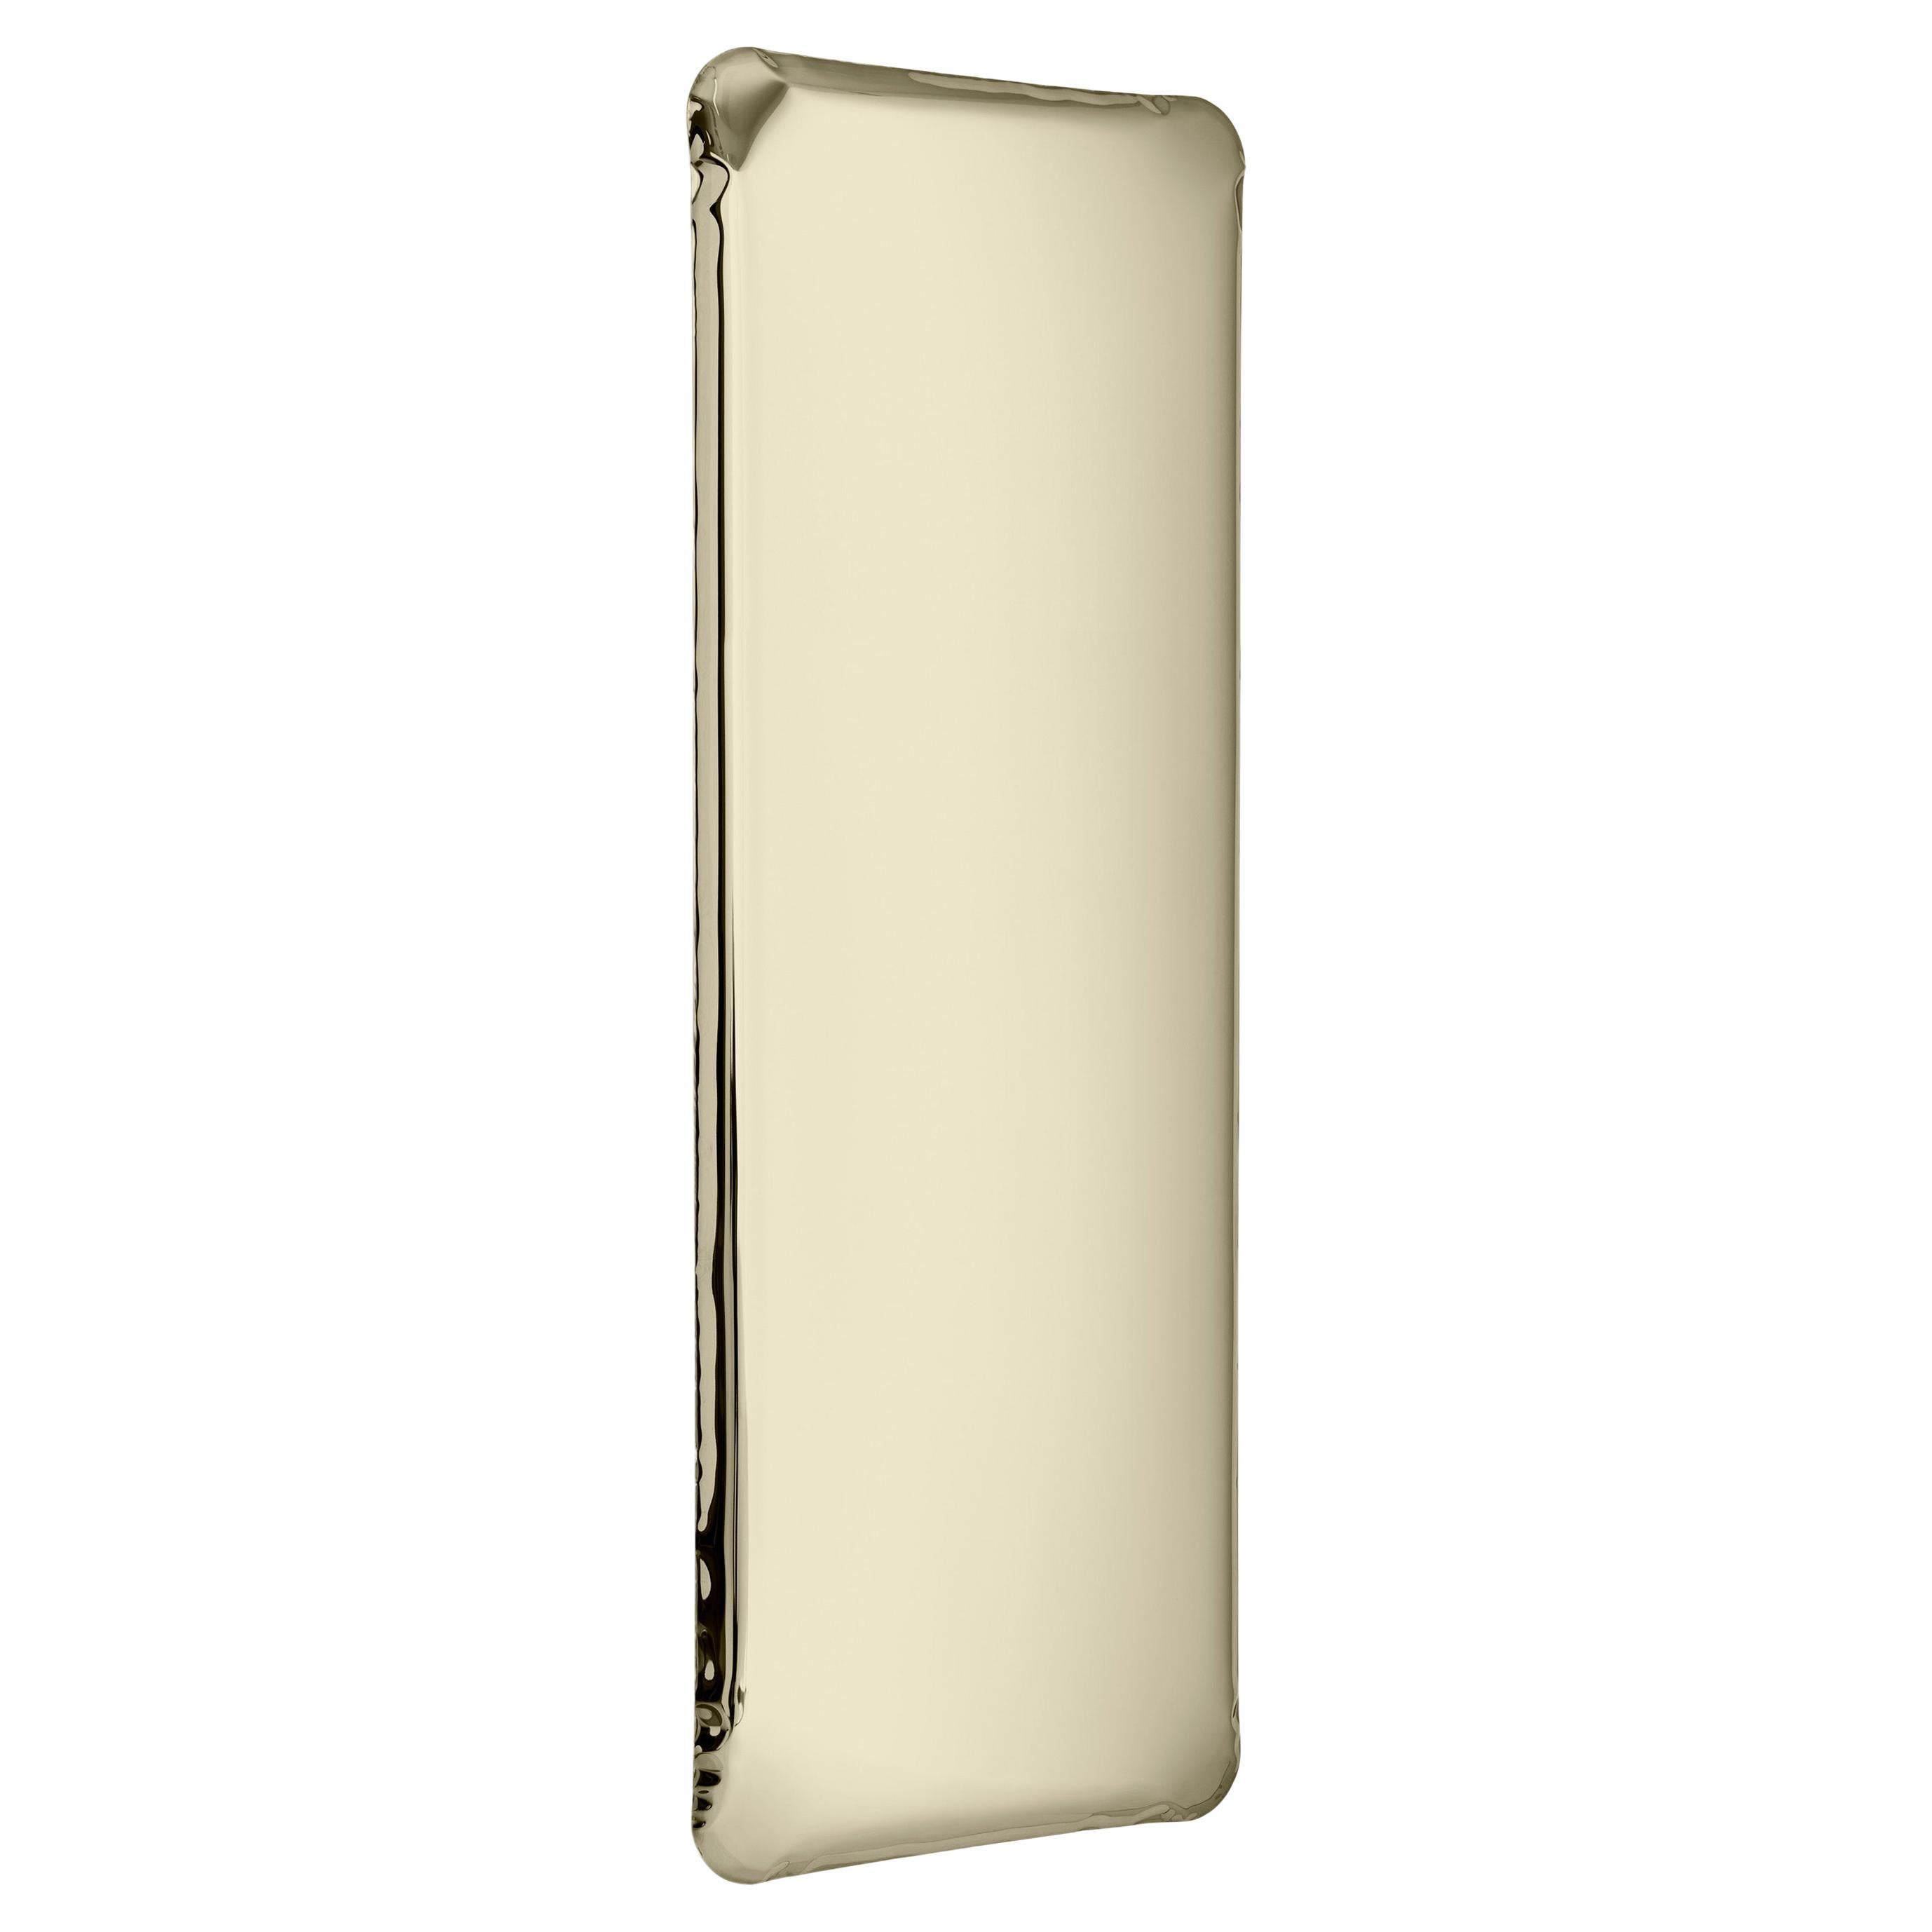 Tafla Q1 Polished Stainless Steel Light Gold Color Wall Mirror by Zieta For Sale